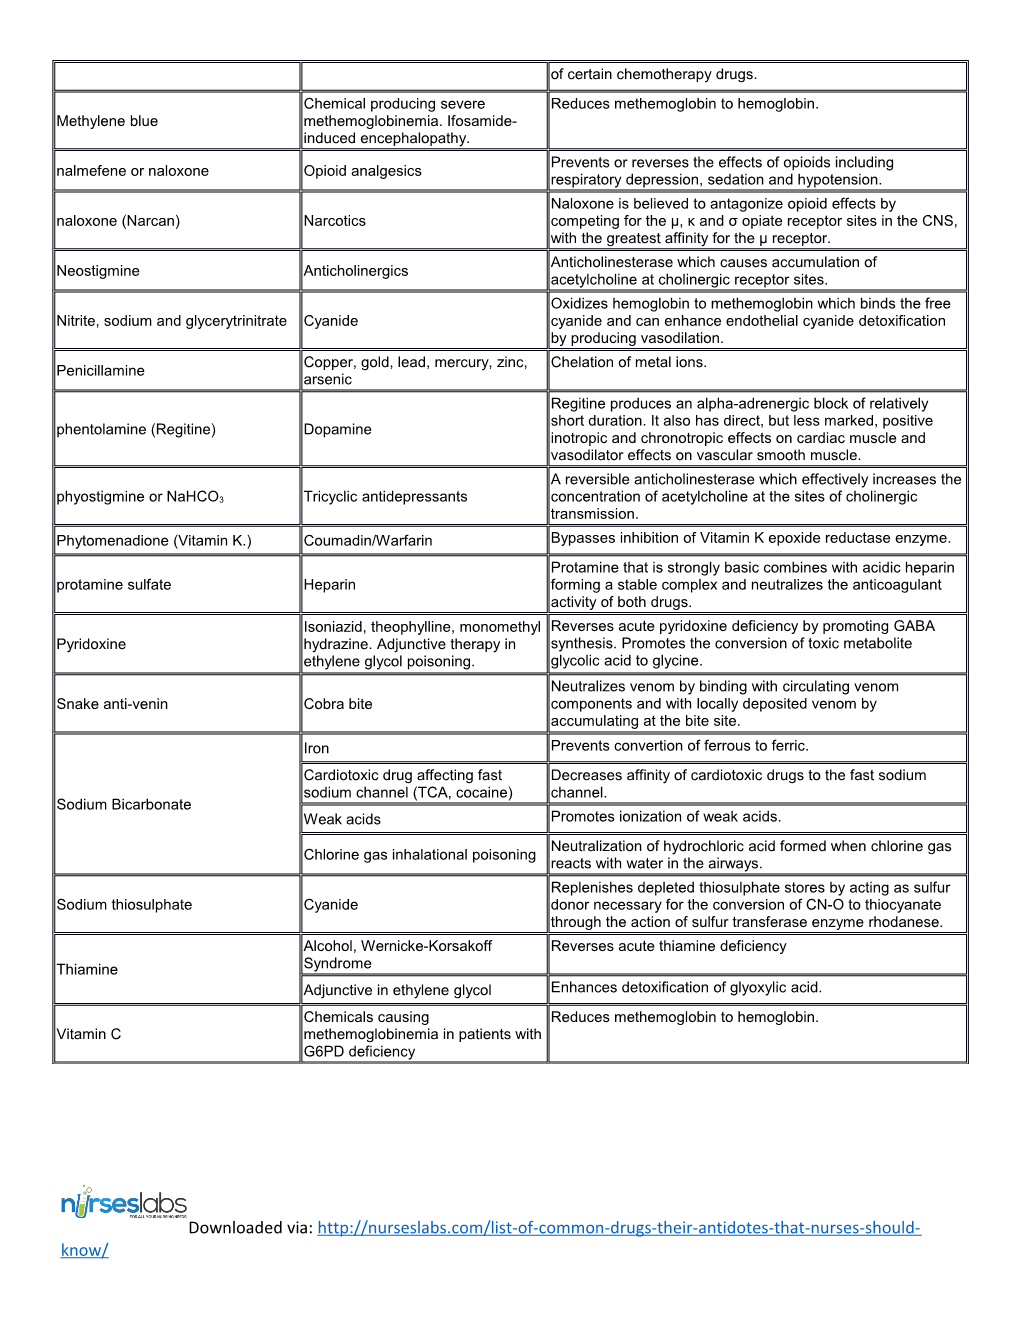 Common Drugs and Antidotes